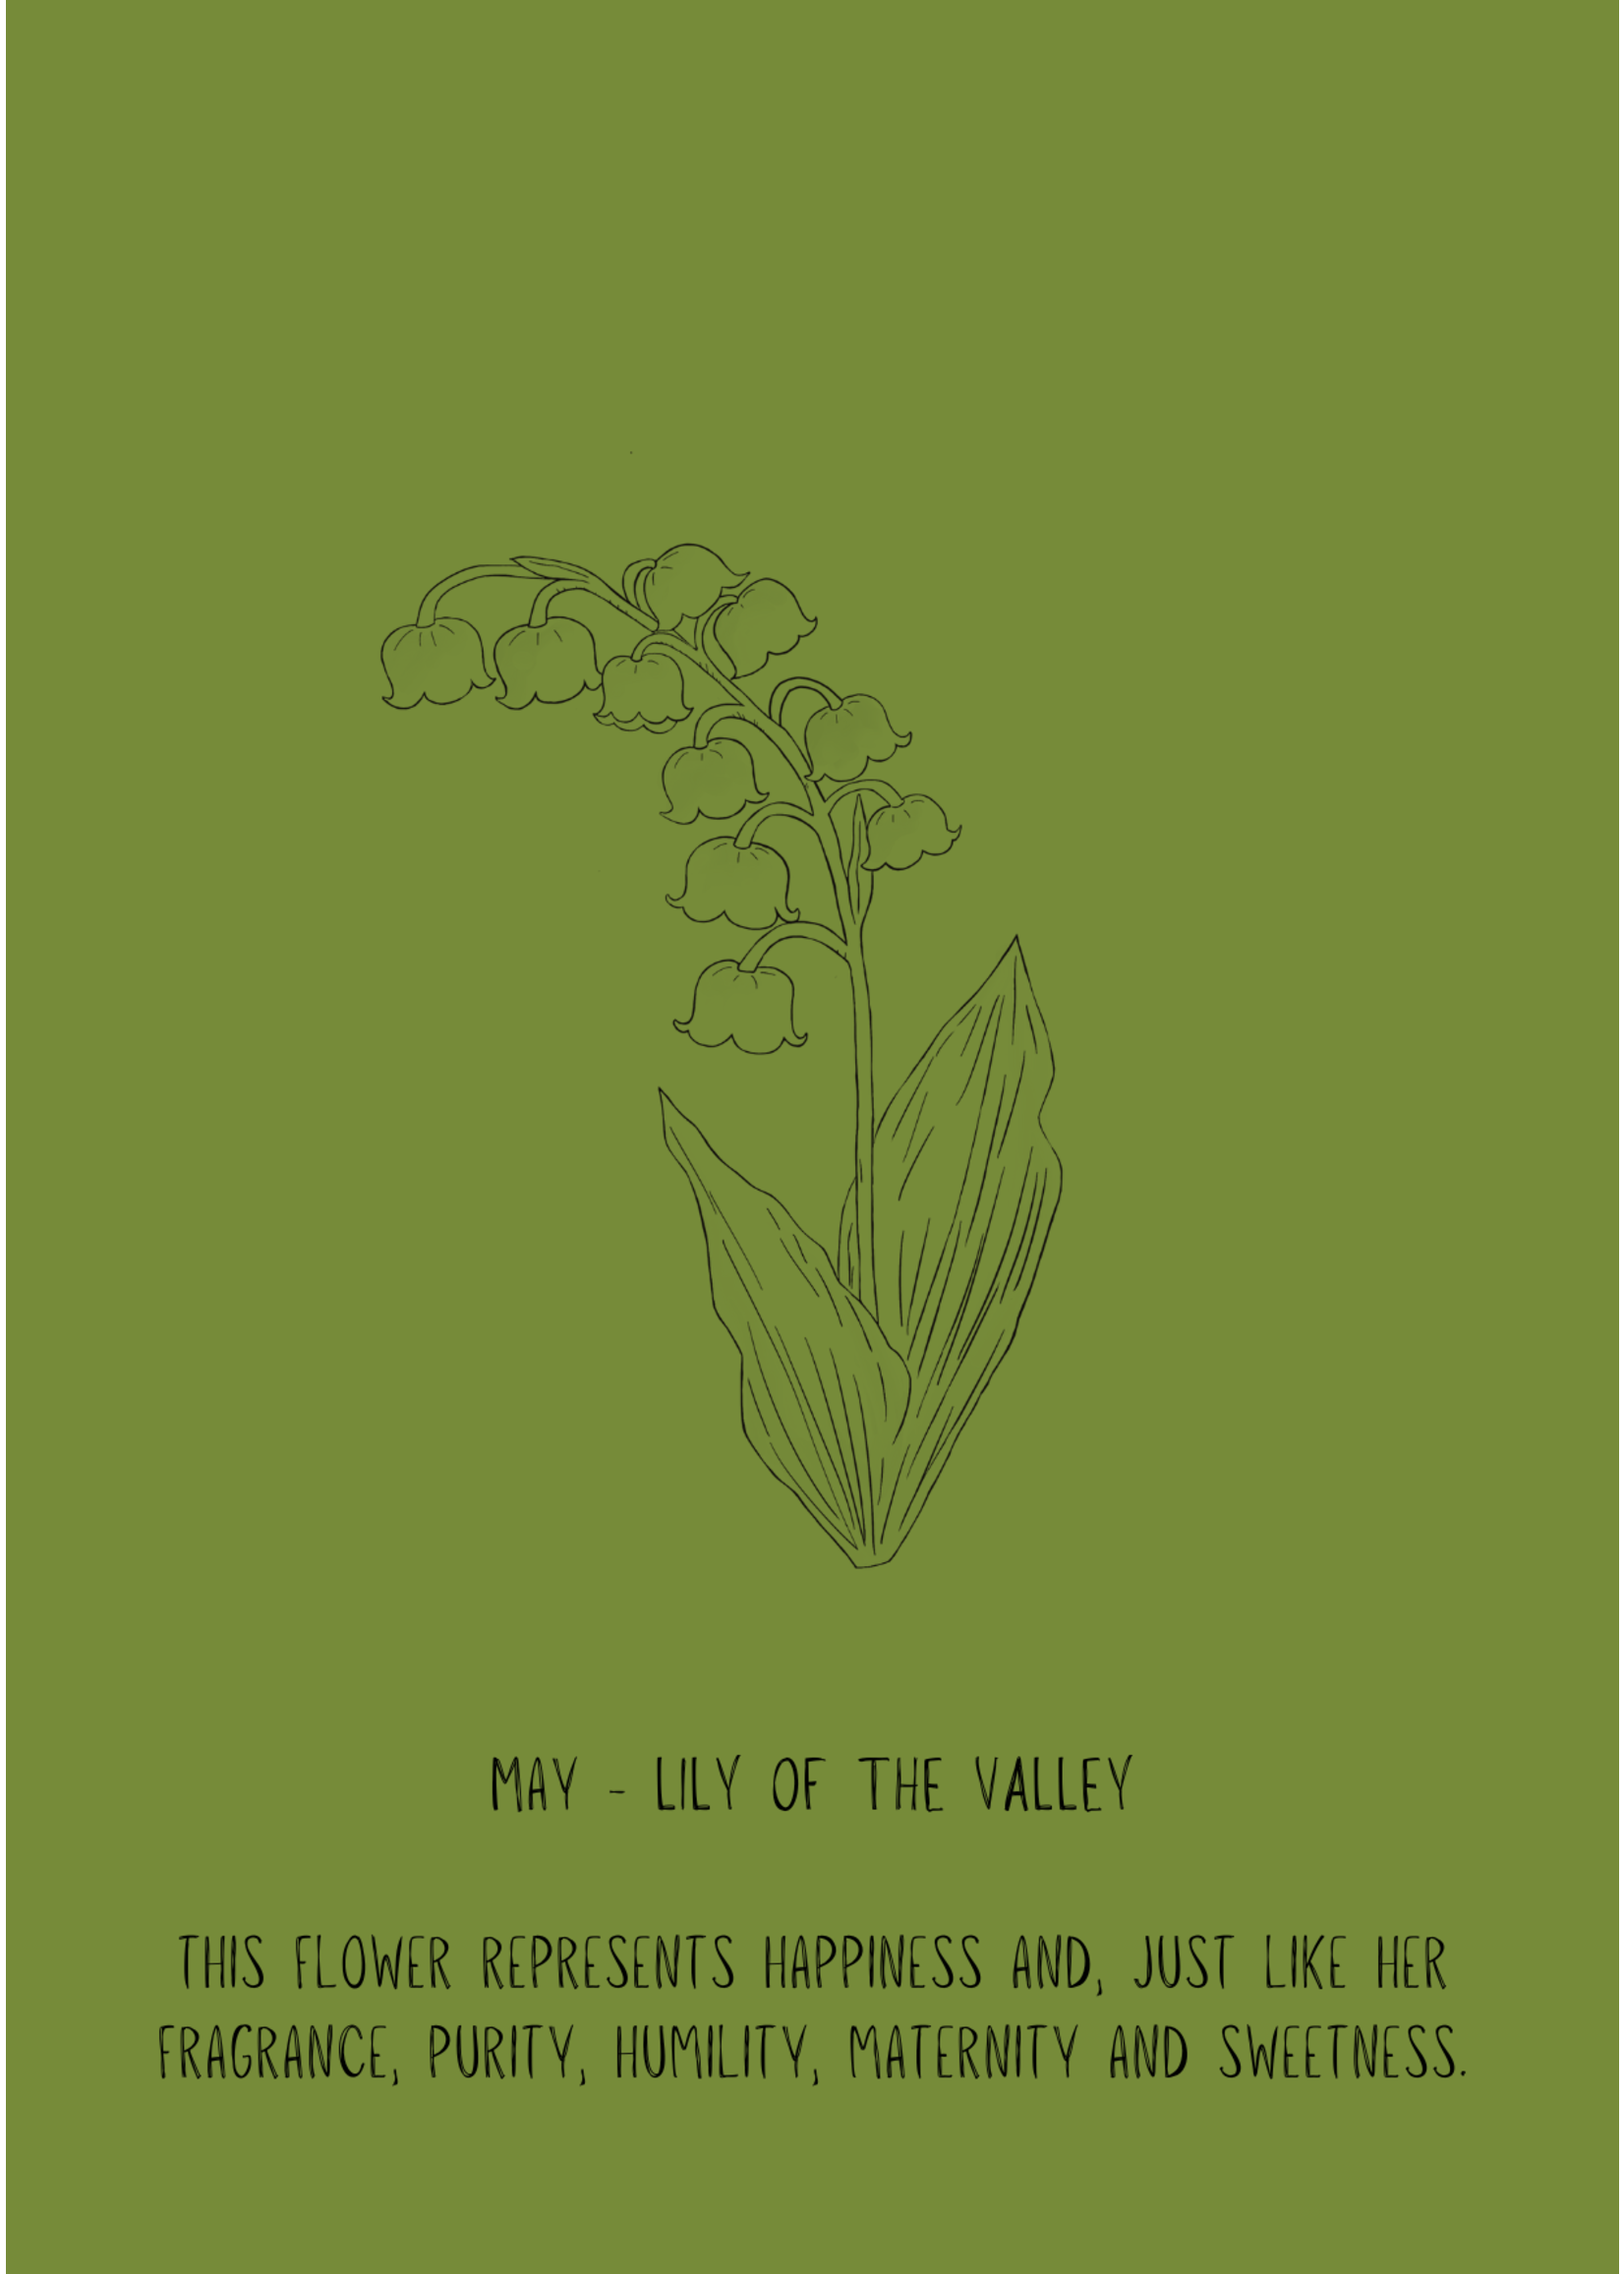 Charm-collection "Lets bloom!" - Lily of the valley